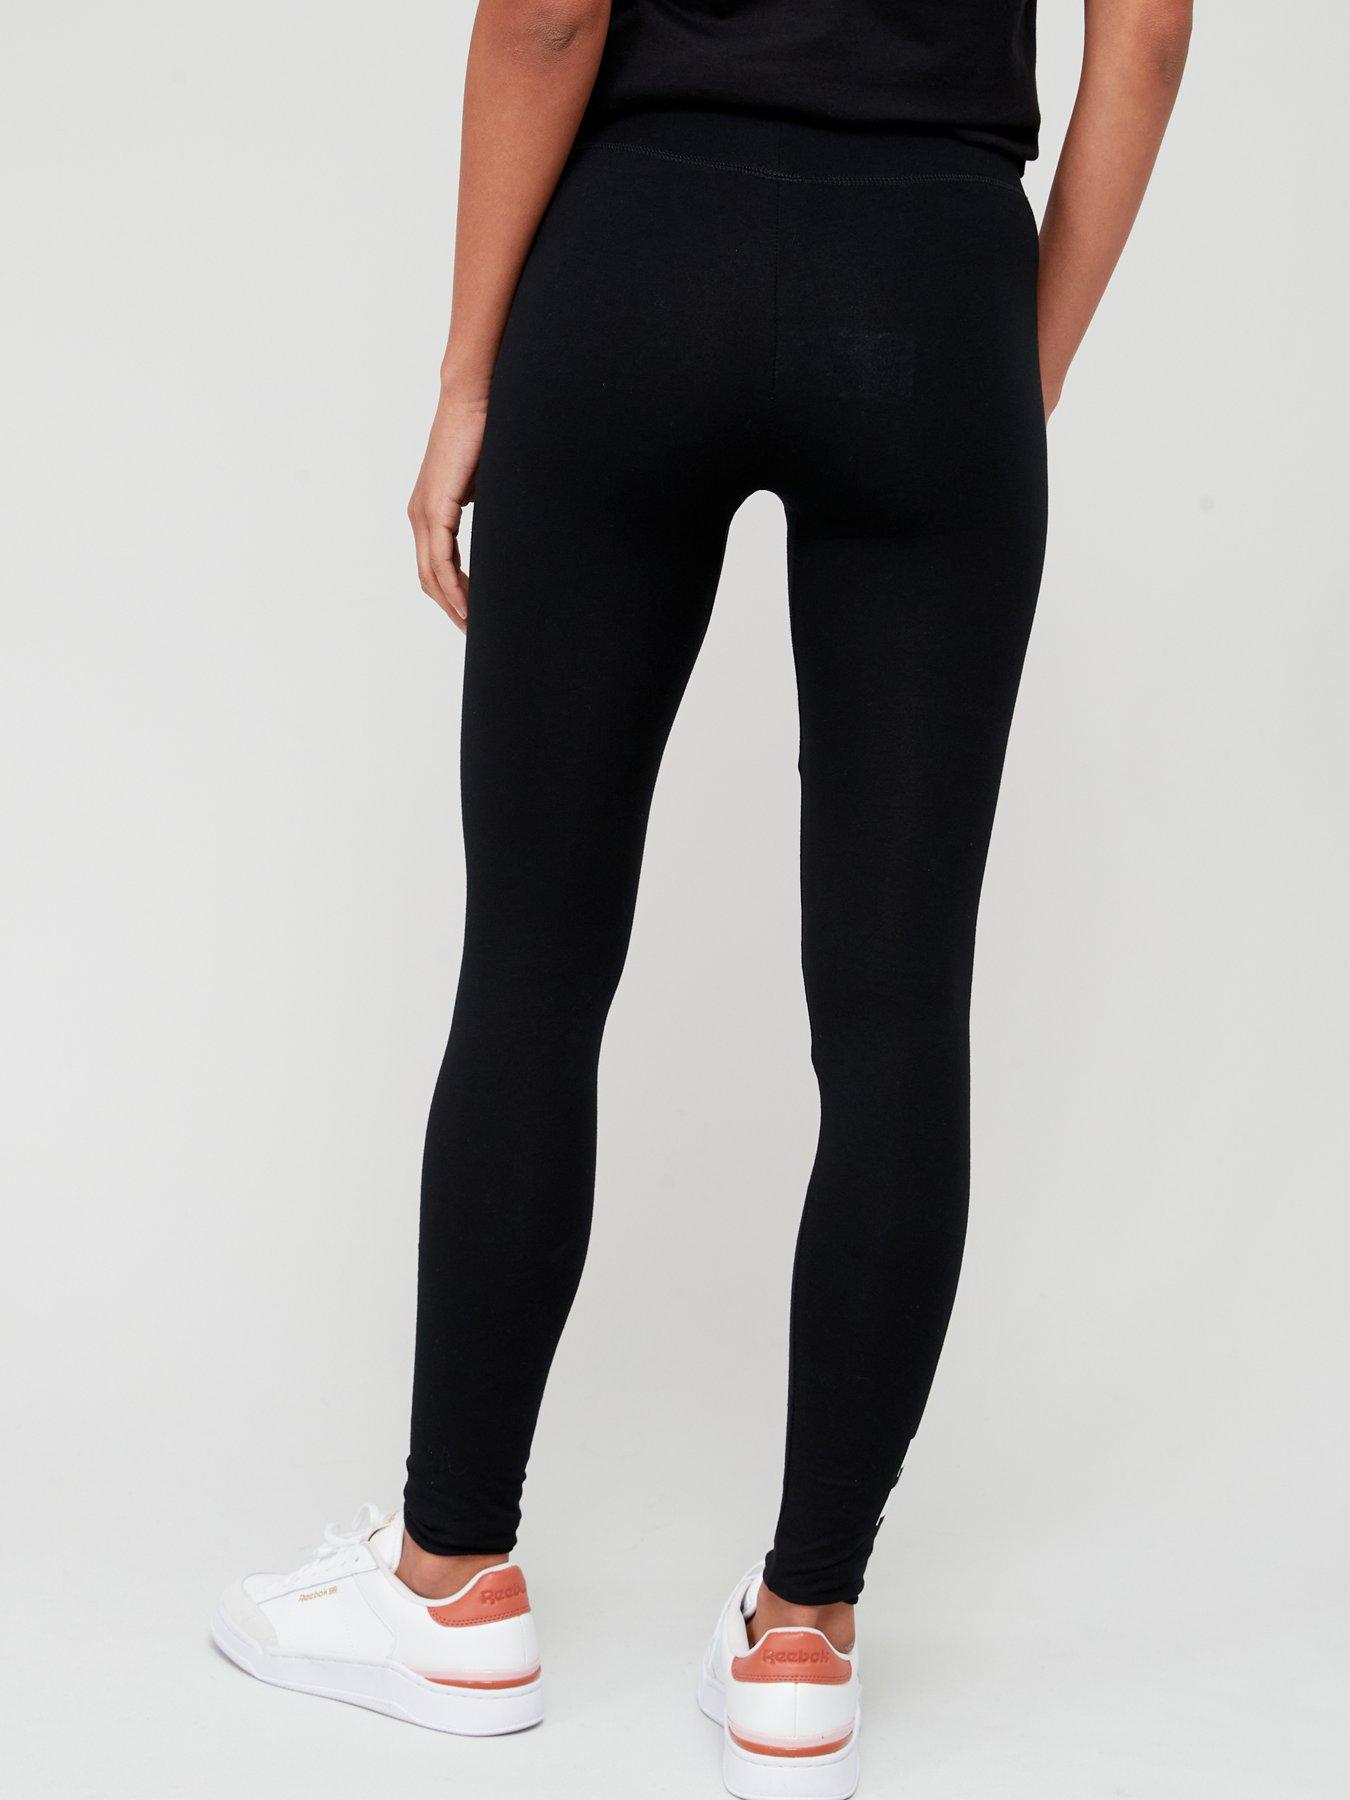 Lululemon tight stuff tights in black with brush stroke detailing size 4,  Men's Fashion, Activewear on Carousell